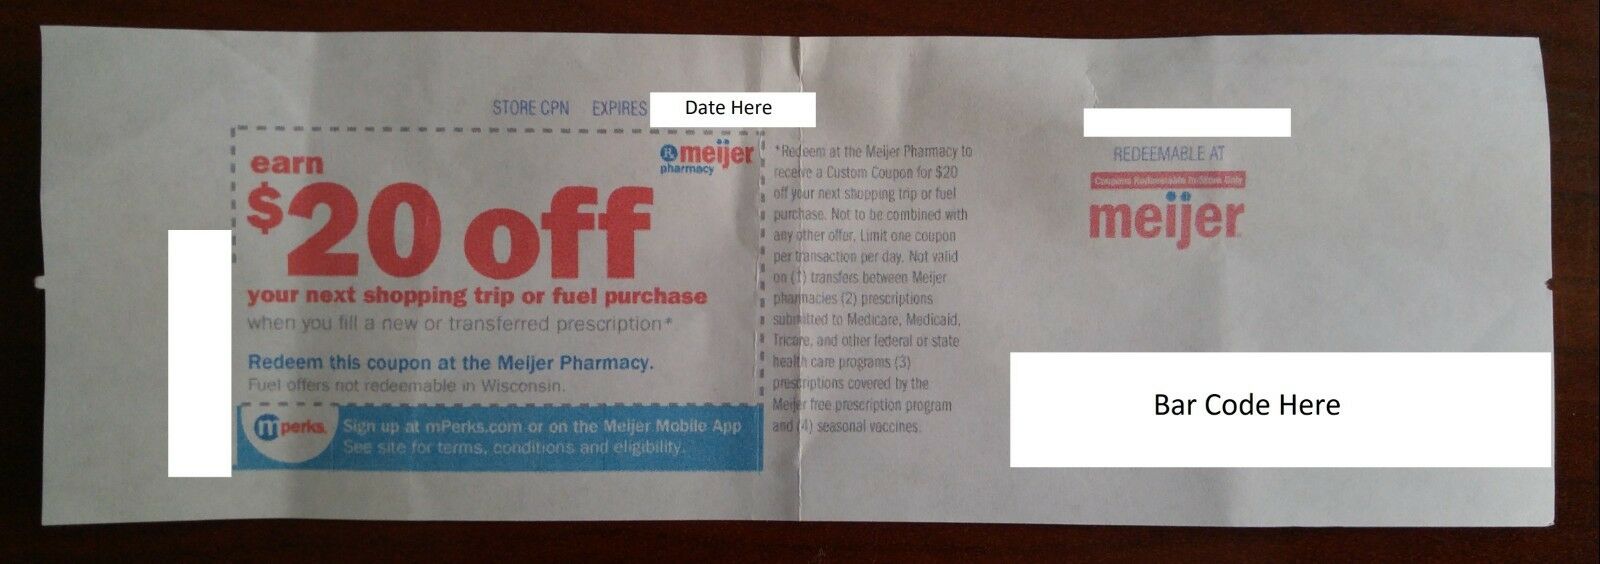 Meijer Pharmacy $20 Coupon With New or Transferred Prescription, Exp 03/24/19